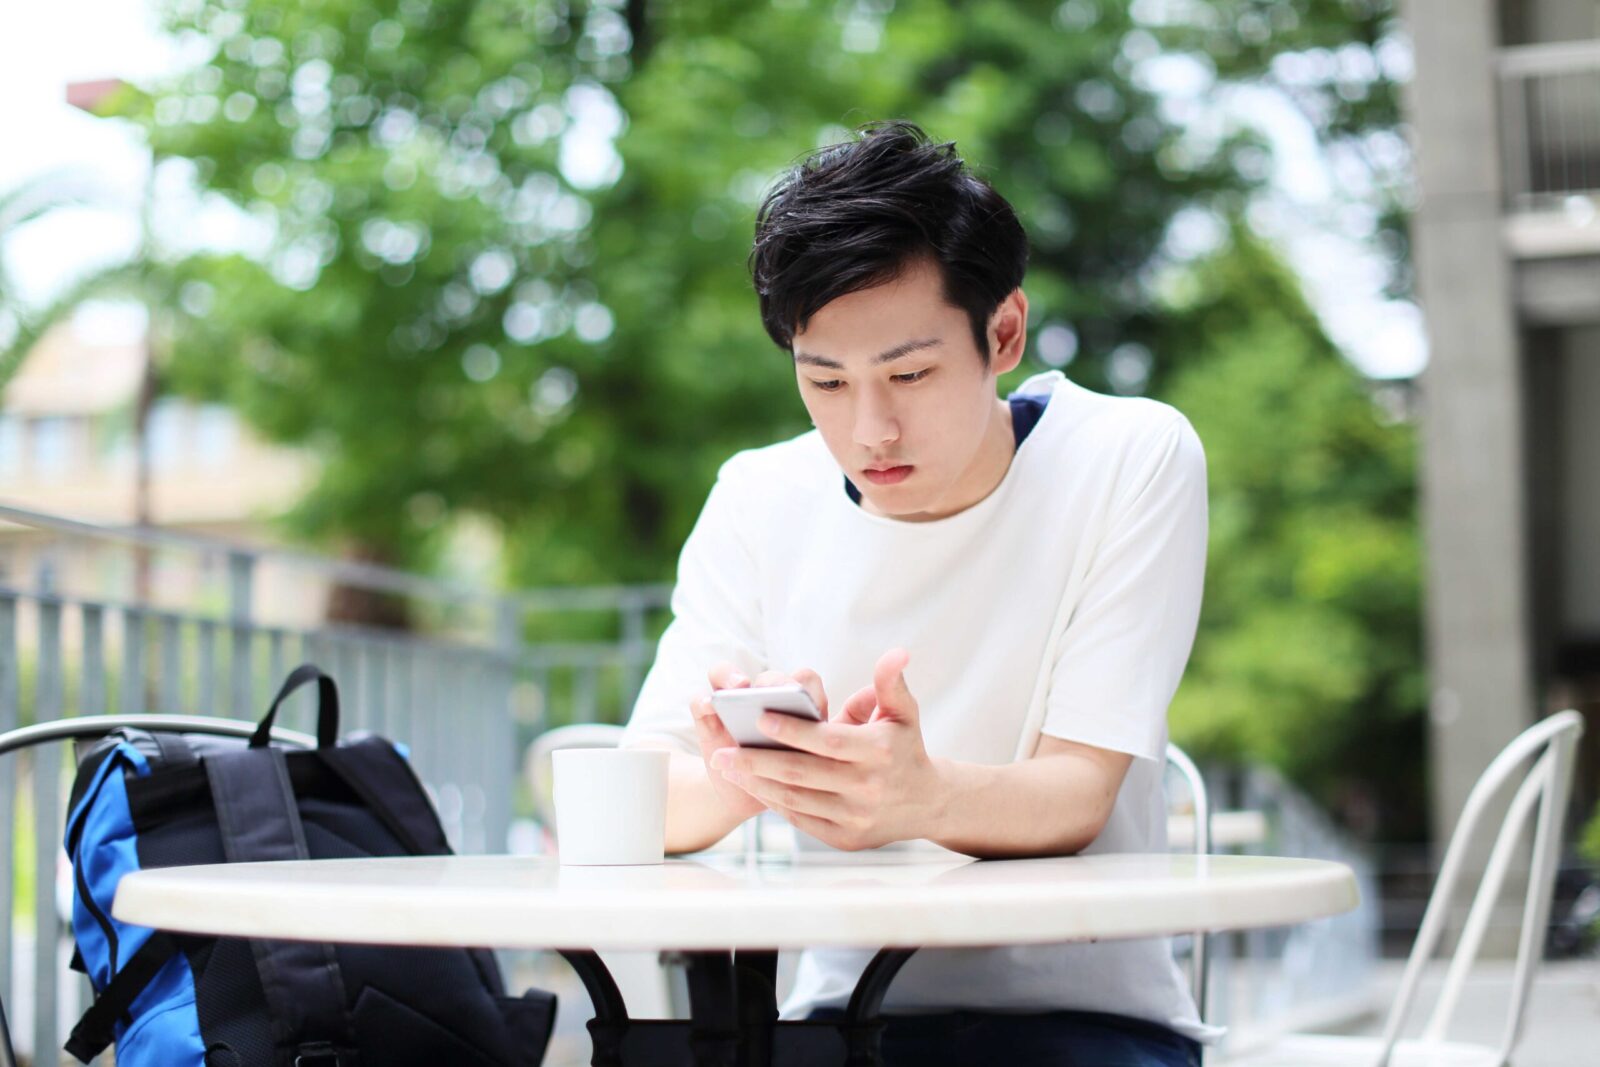 University student using a smartphone during a break